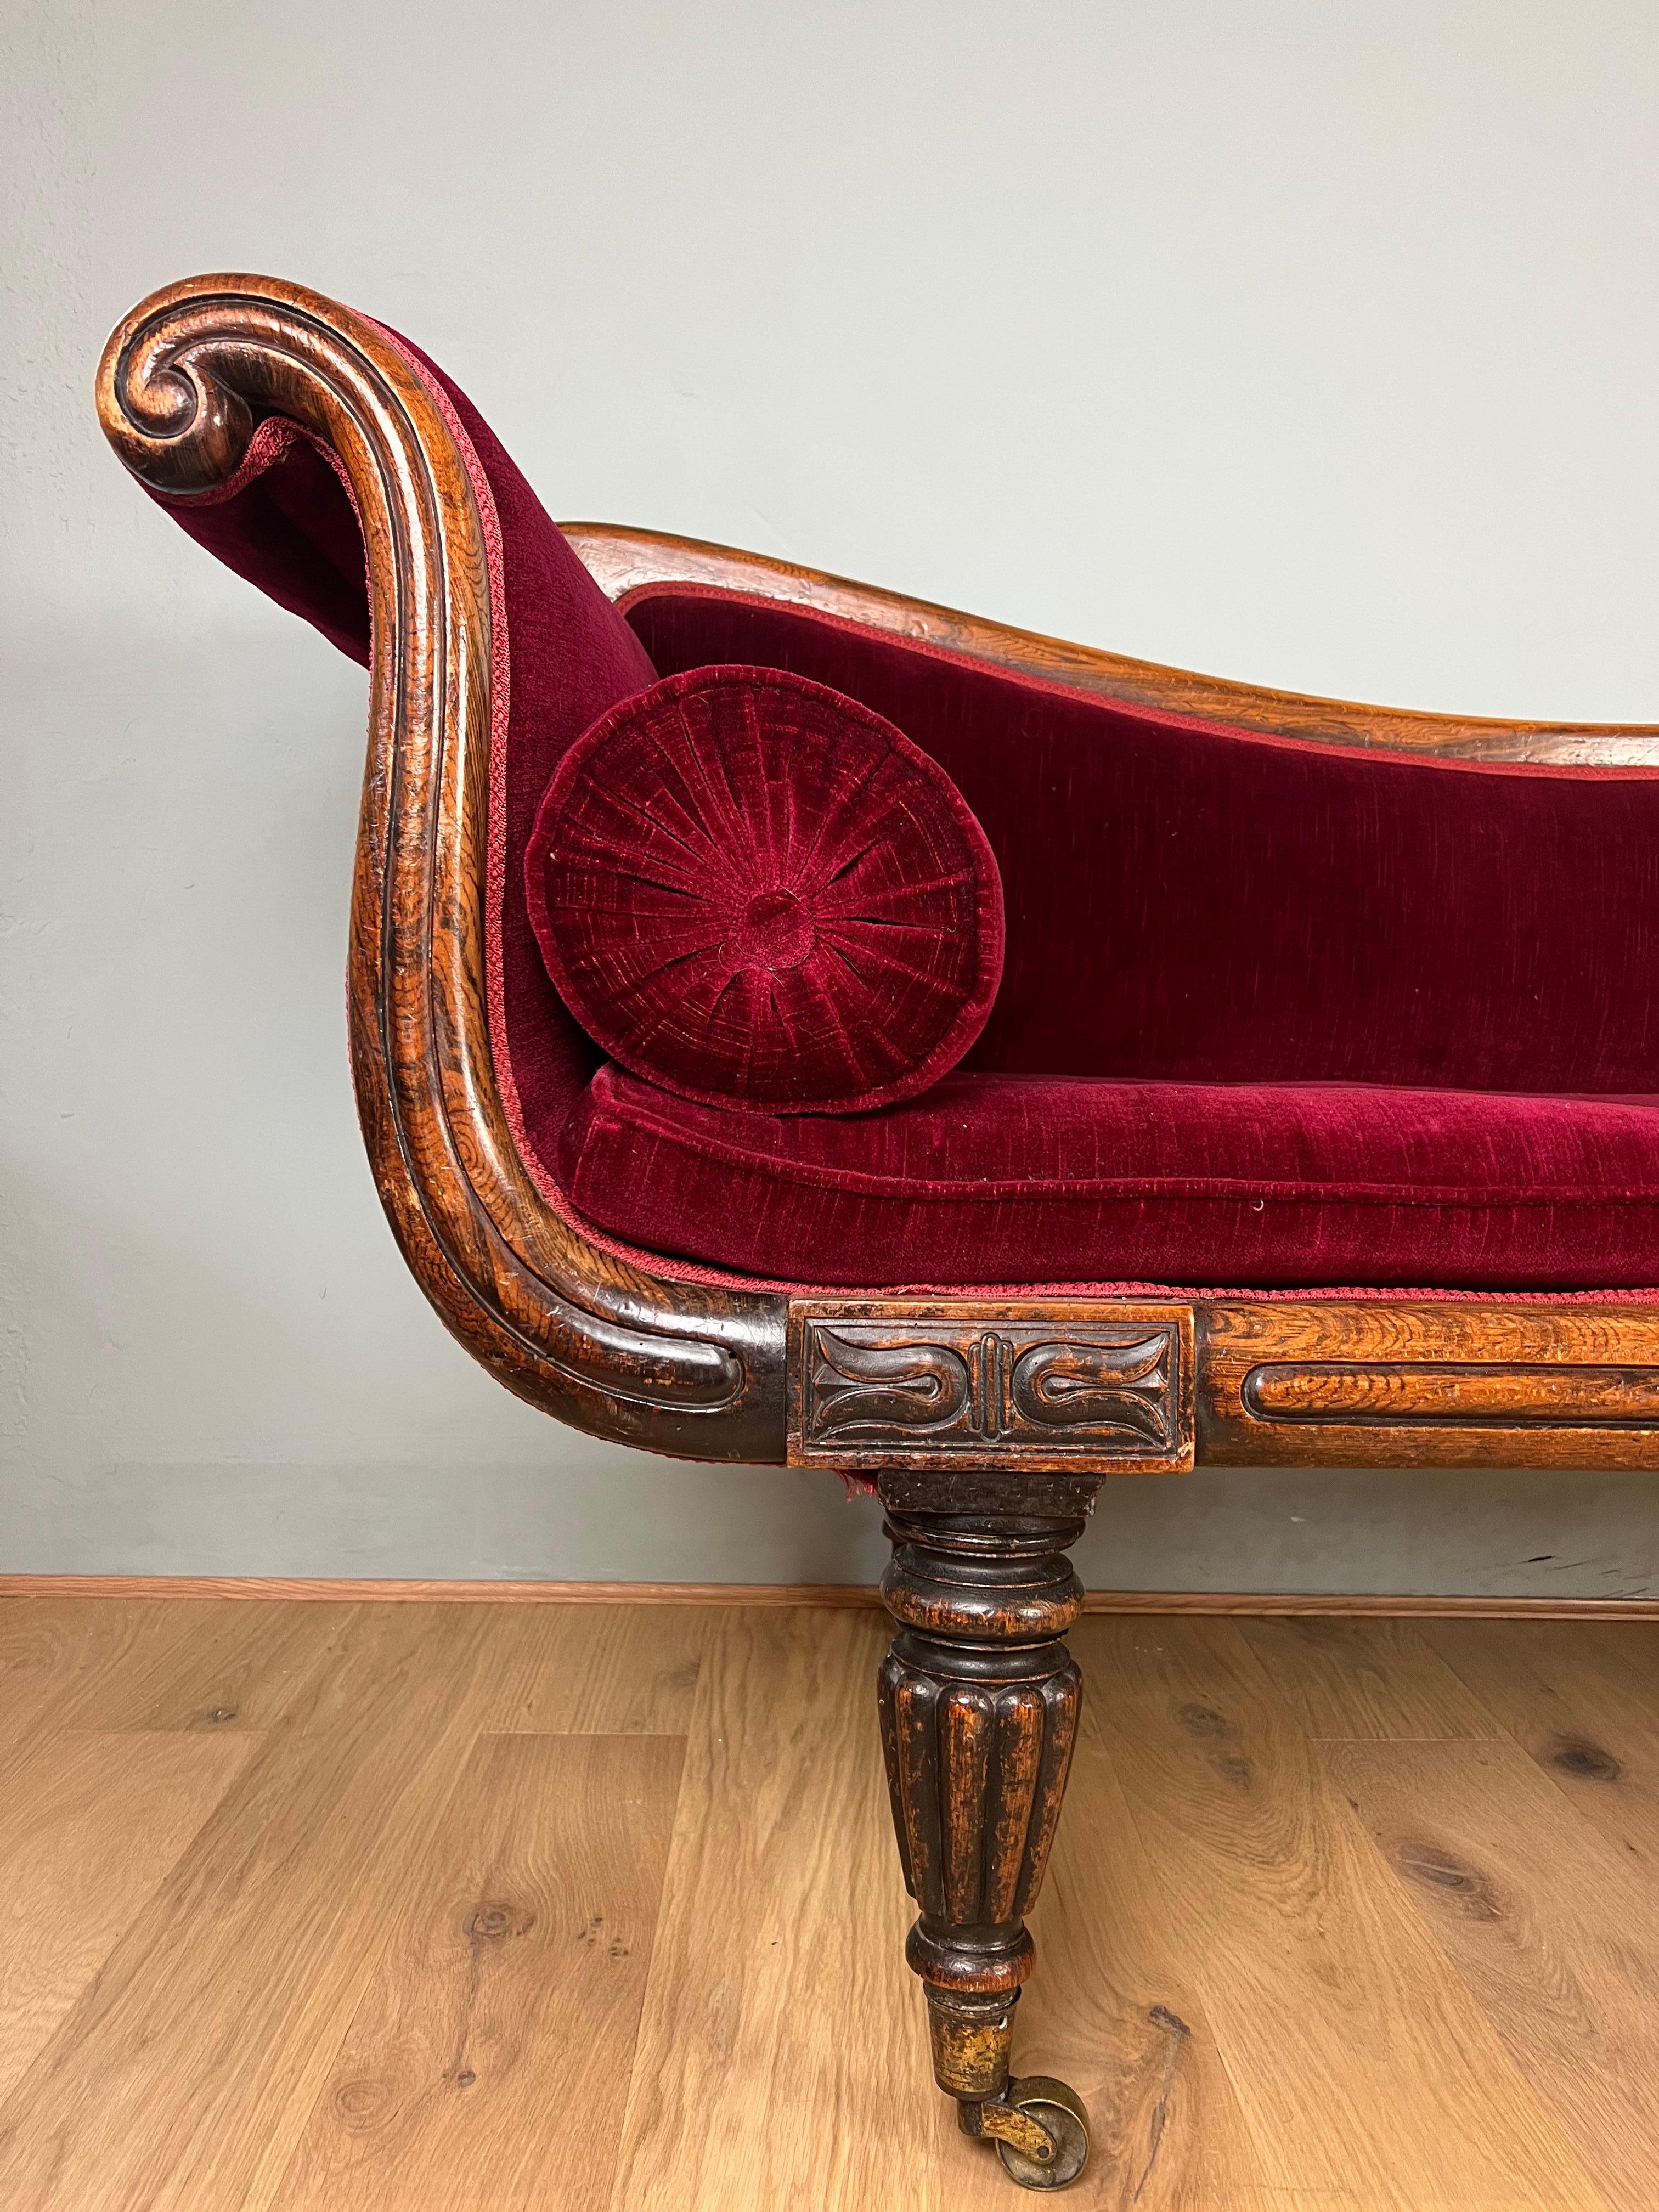 A very attractive Regency simulated rosewood (on beech) chaise-longue, elegantly shaped with a scroll back and side. Acanthus leaf decoration adorns the frieze, this rests on bold turned reeded legs and brass casters. This graceful chaise has claret